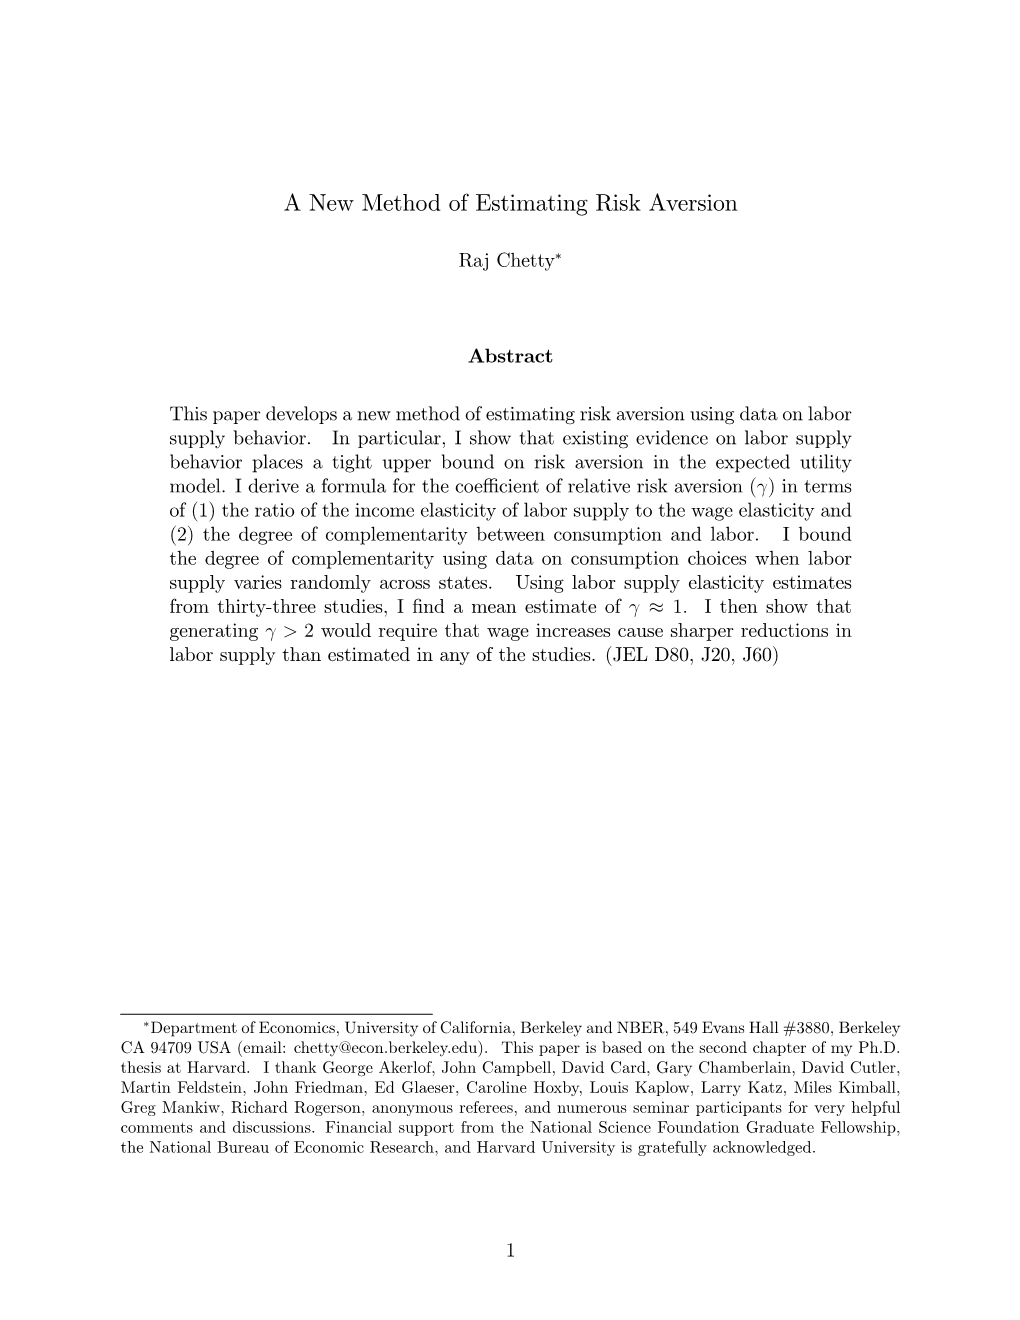 A New Method of Estimating Risk Aversion